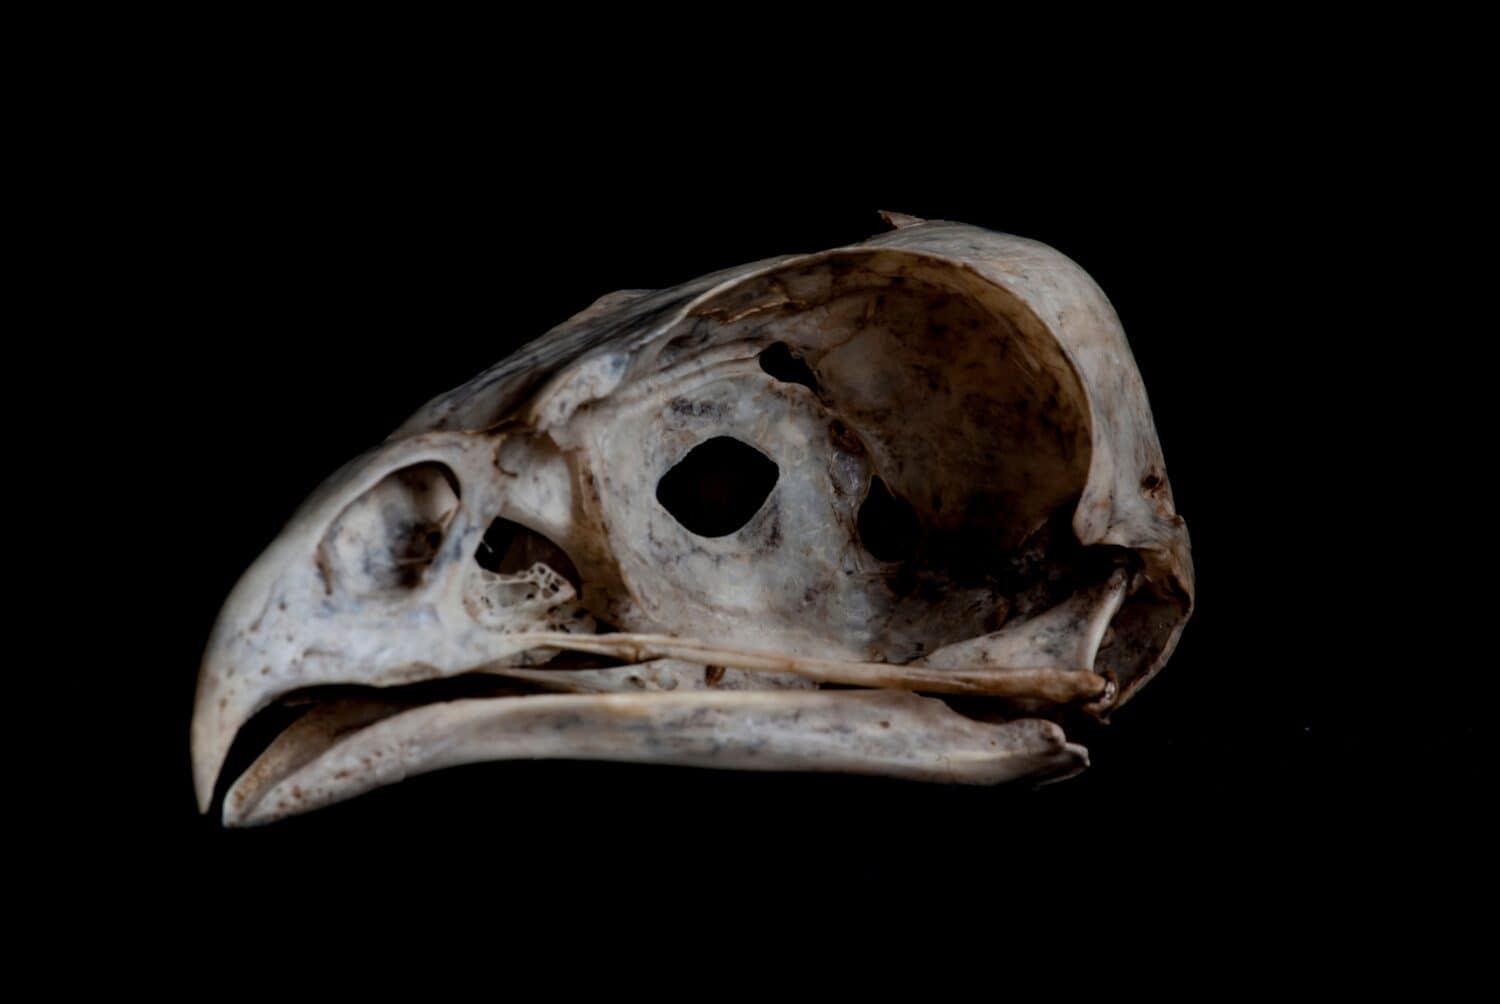 The skull of a barn owl on a black background